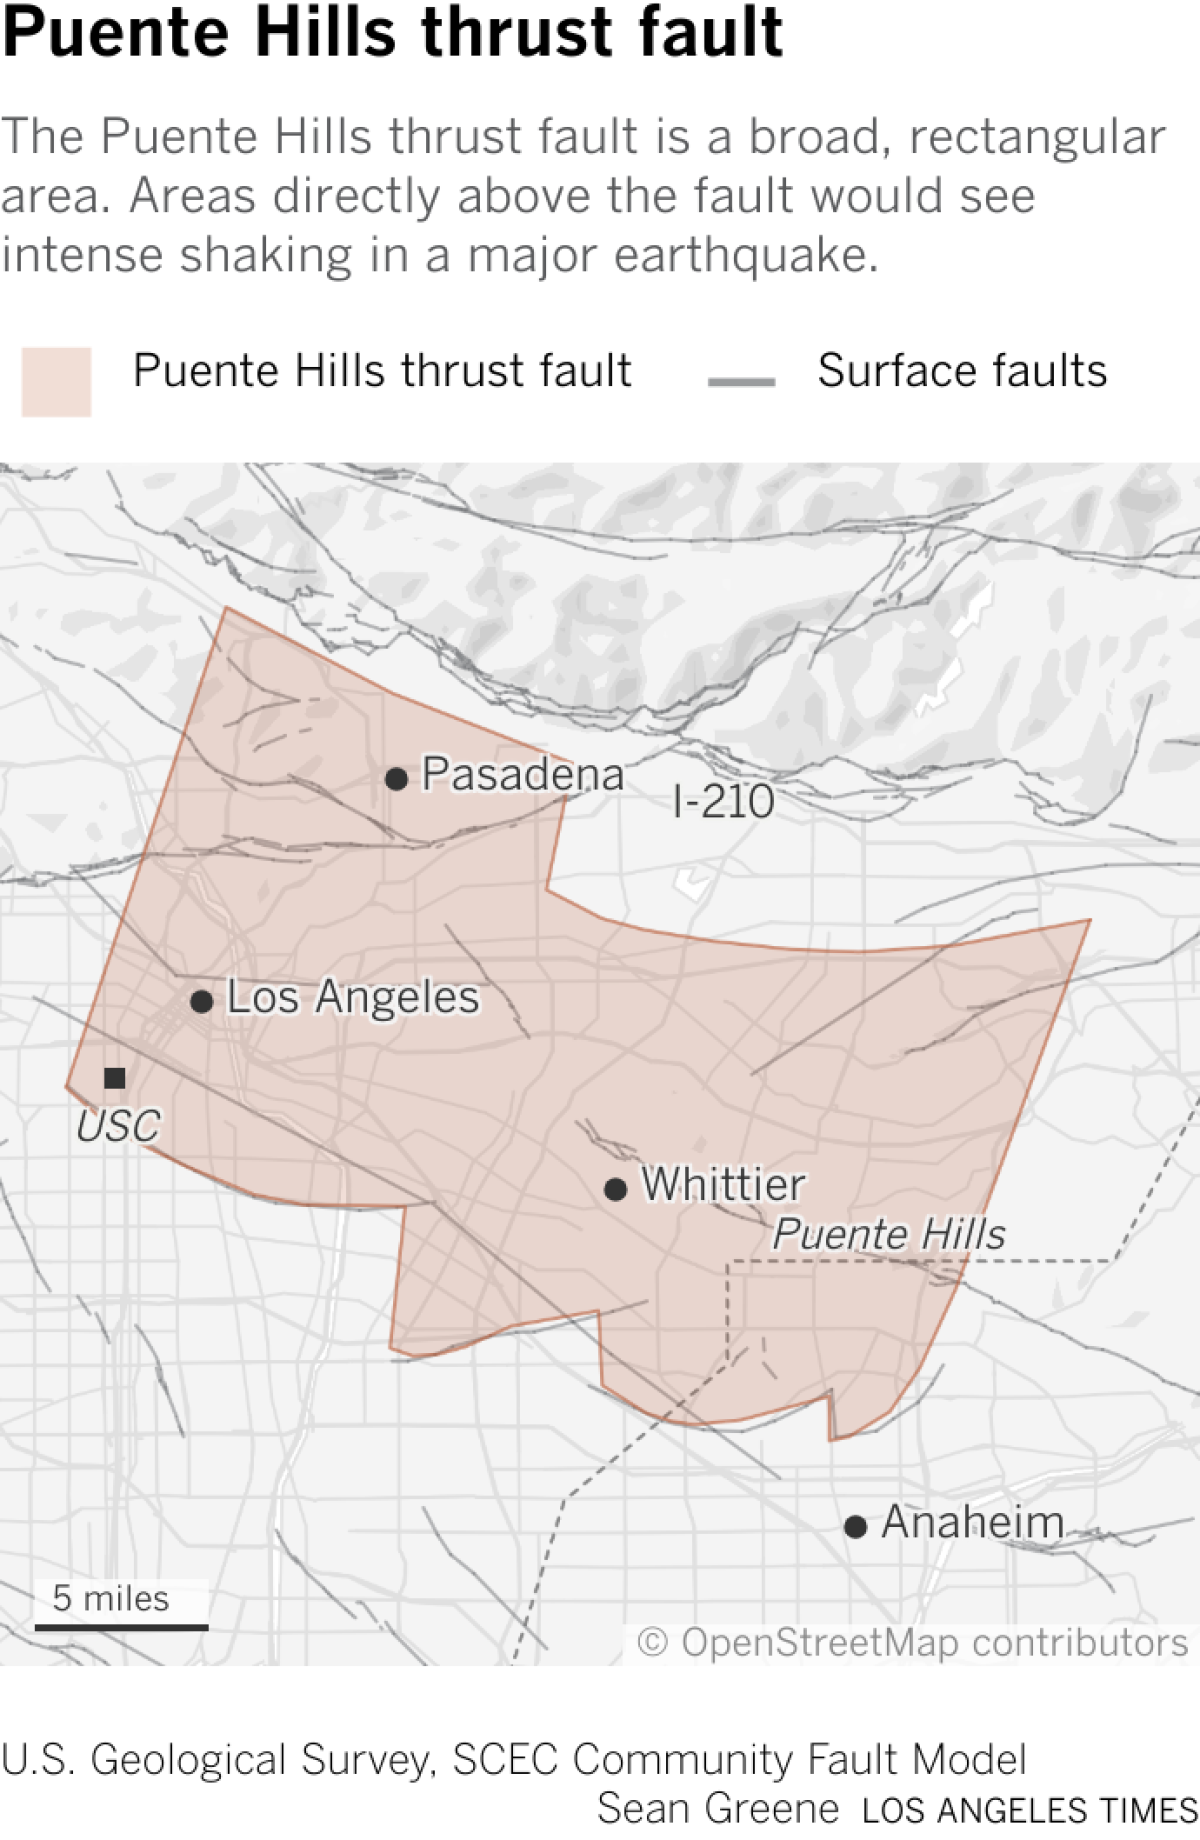 Map shows the approximate location of the Puente Hills thrust fault, which stretches from the Glendale and Pasadena in the west to Puente Hills to the east.